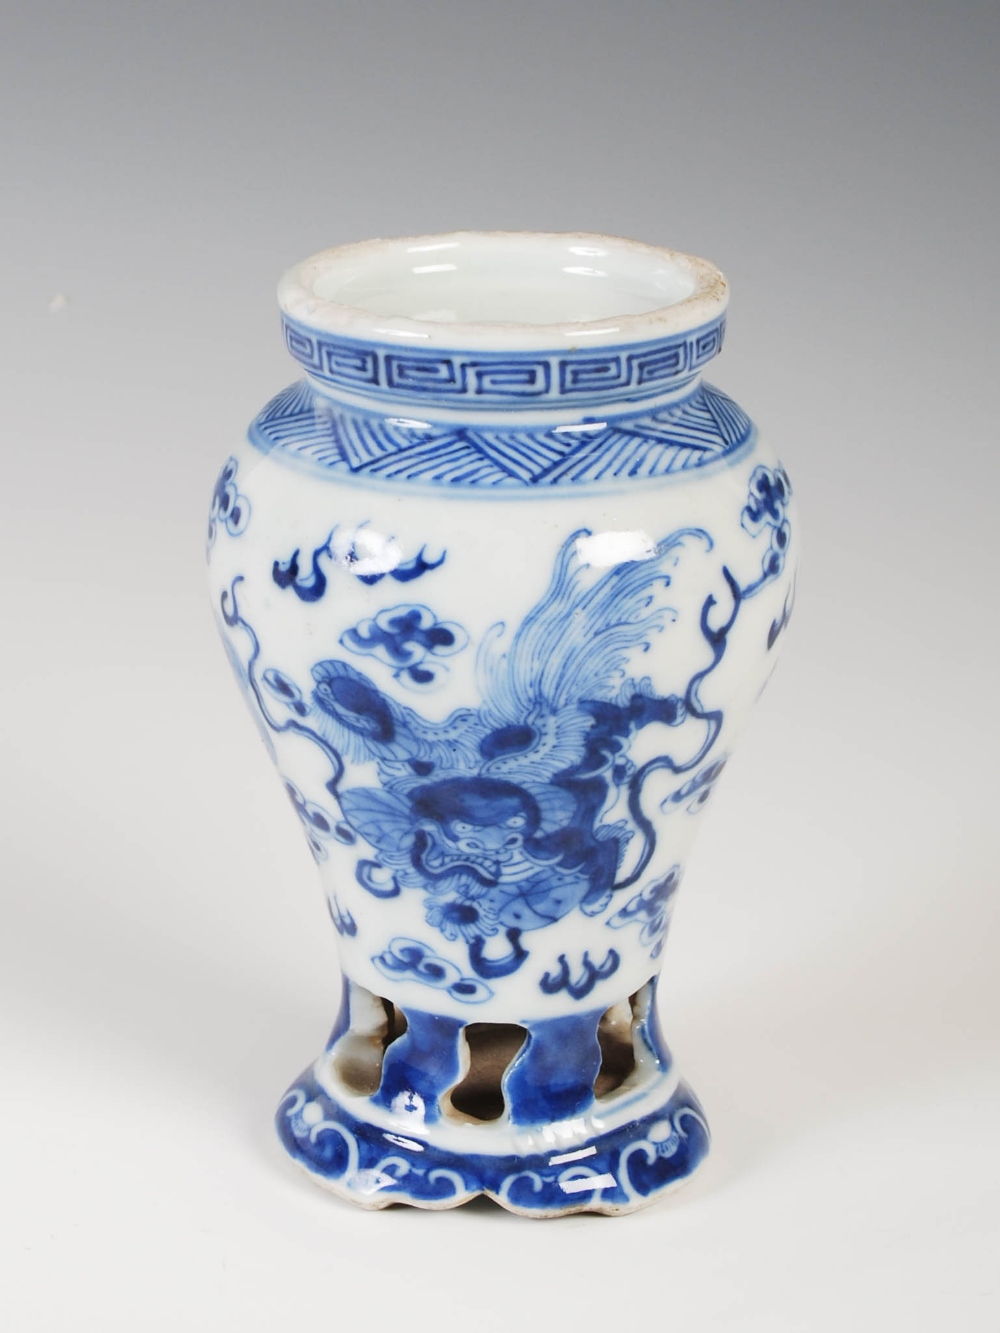 A Chinese porcelain blue and white incense burner stand, late 19th/ early 20th century, decorated